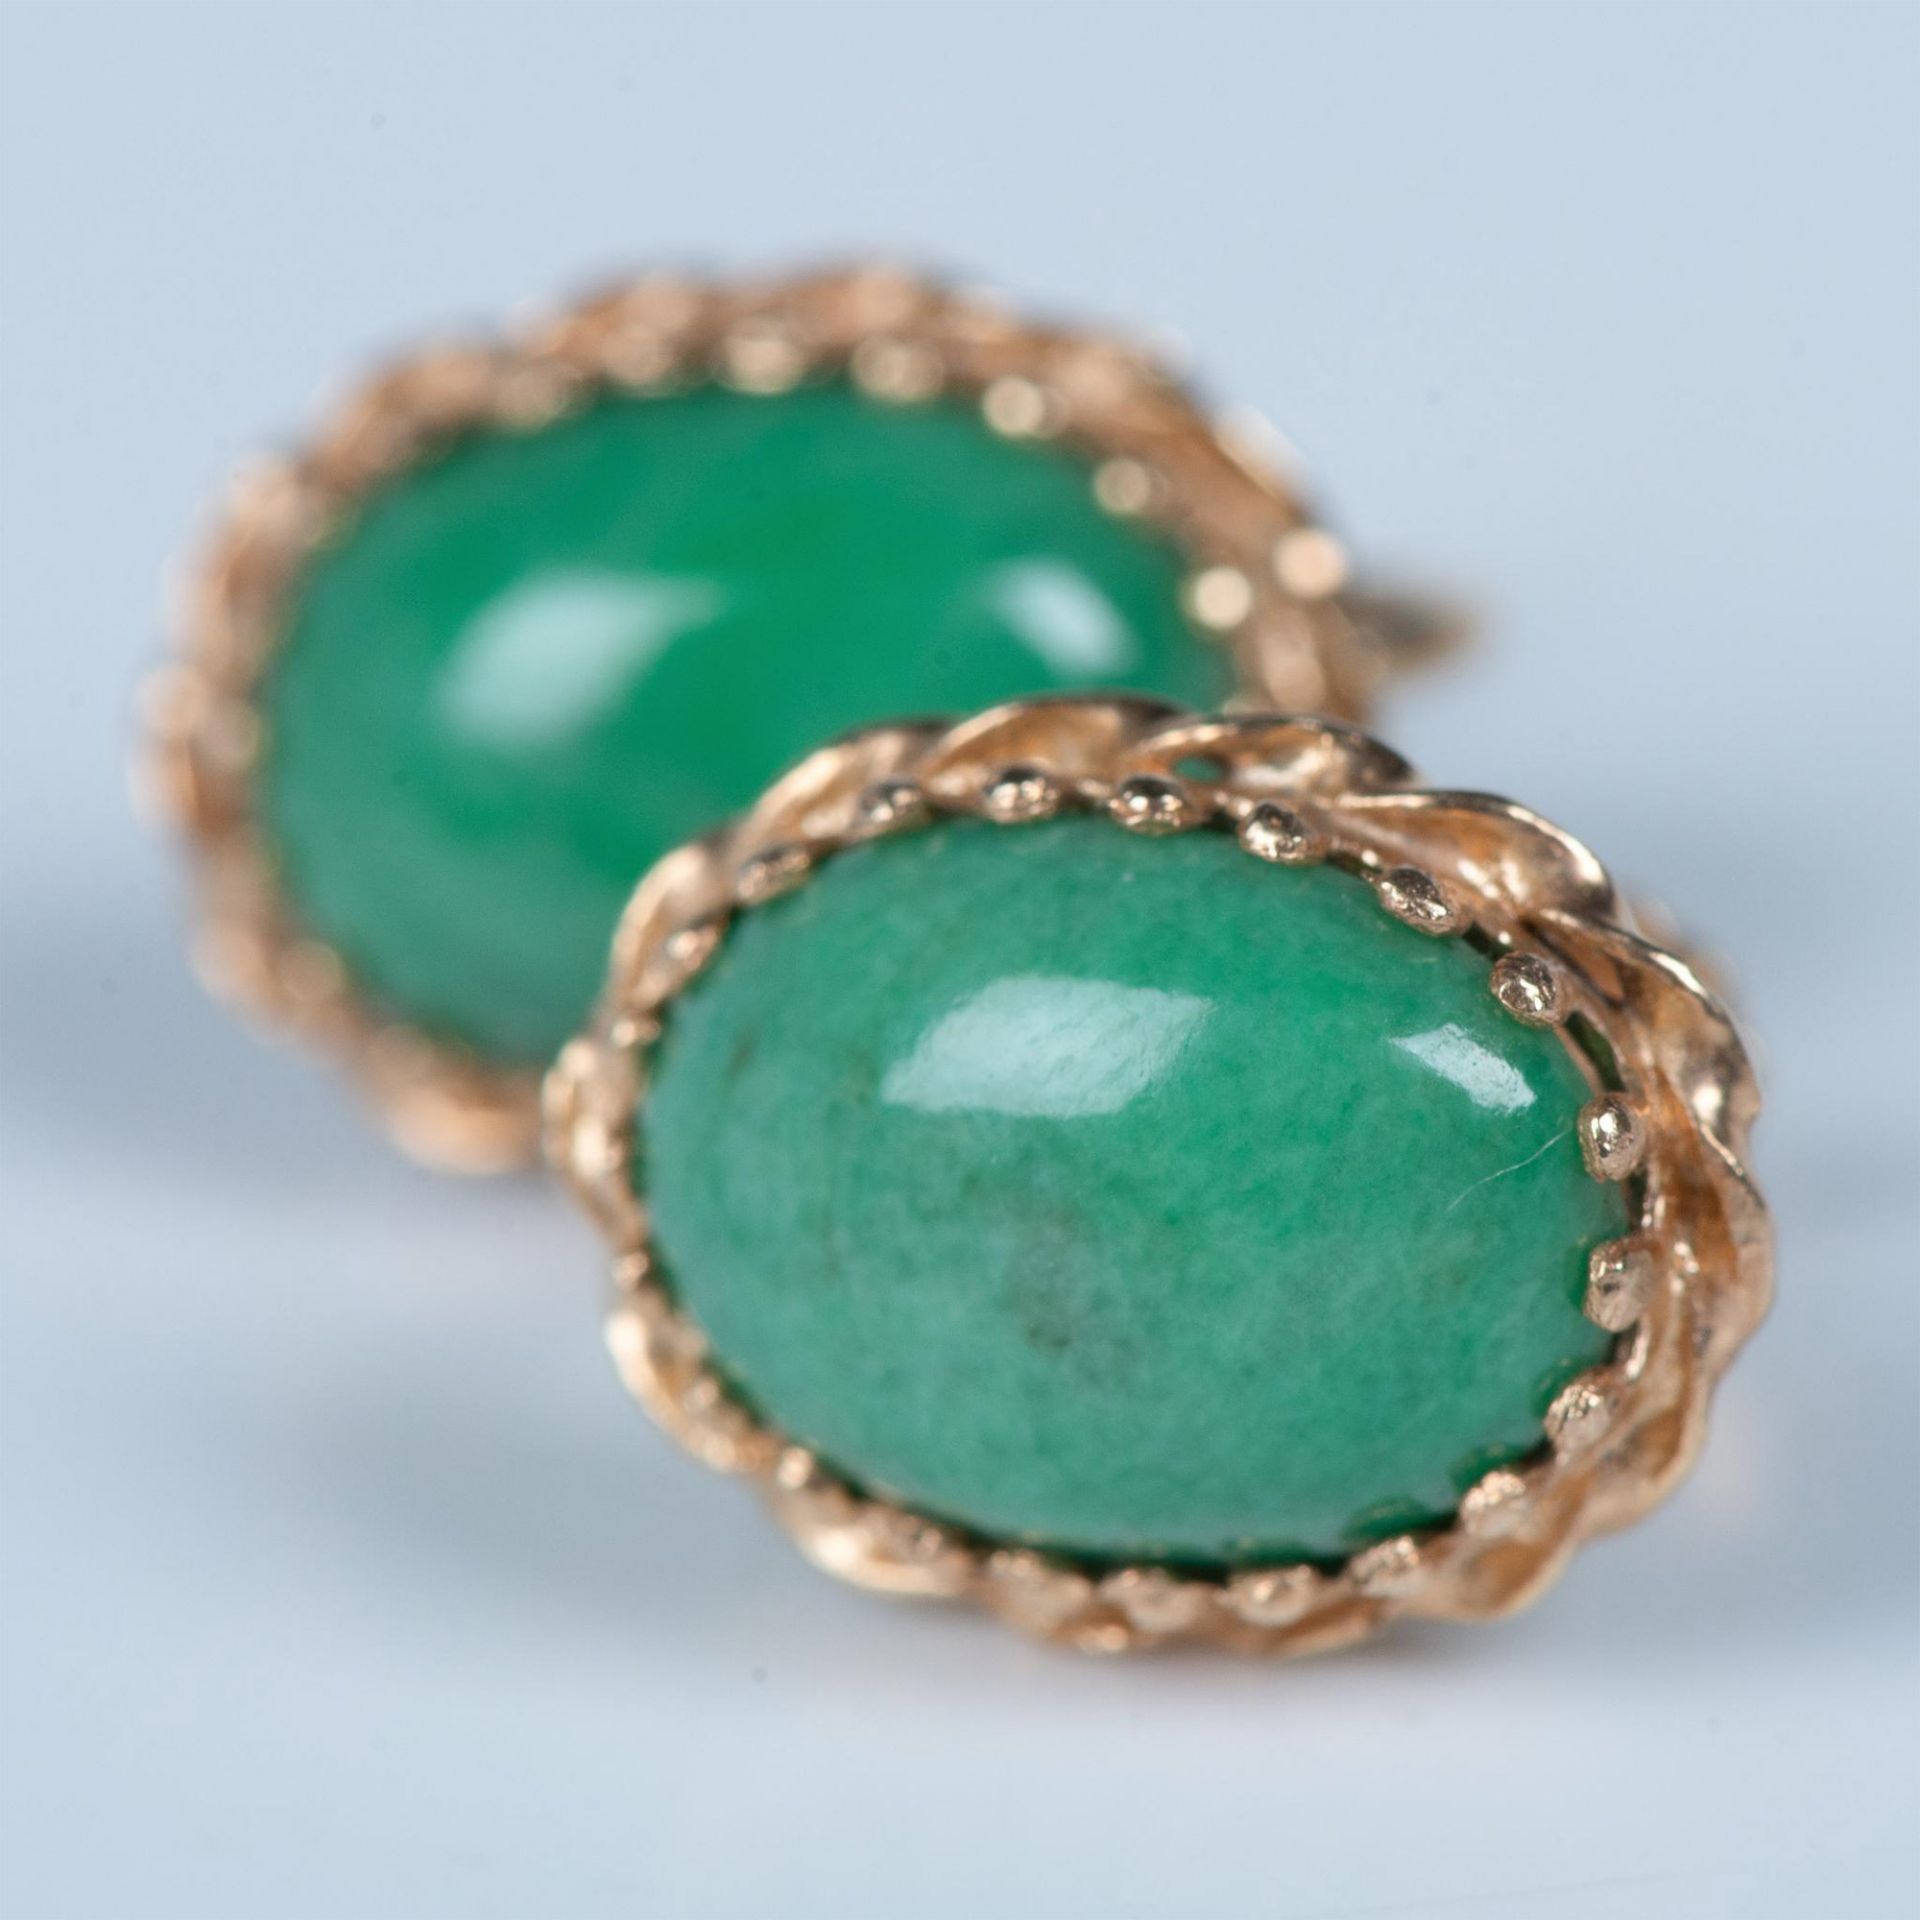 Russian Jade and Gold Earrings - Image 5 of 5